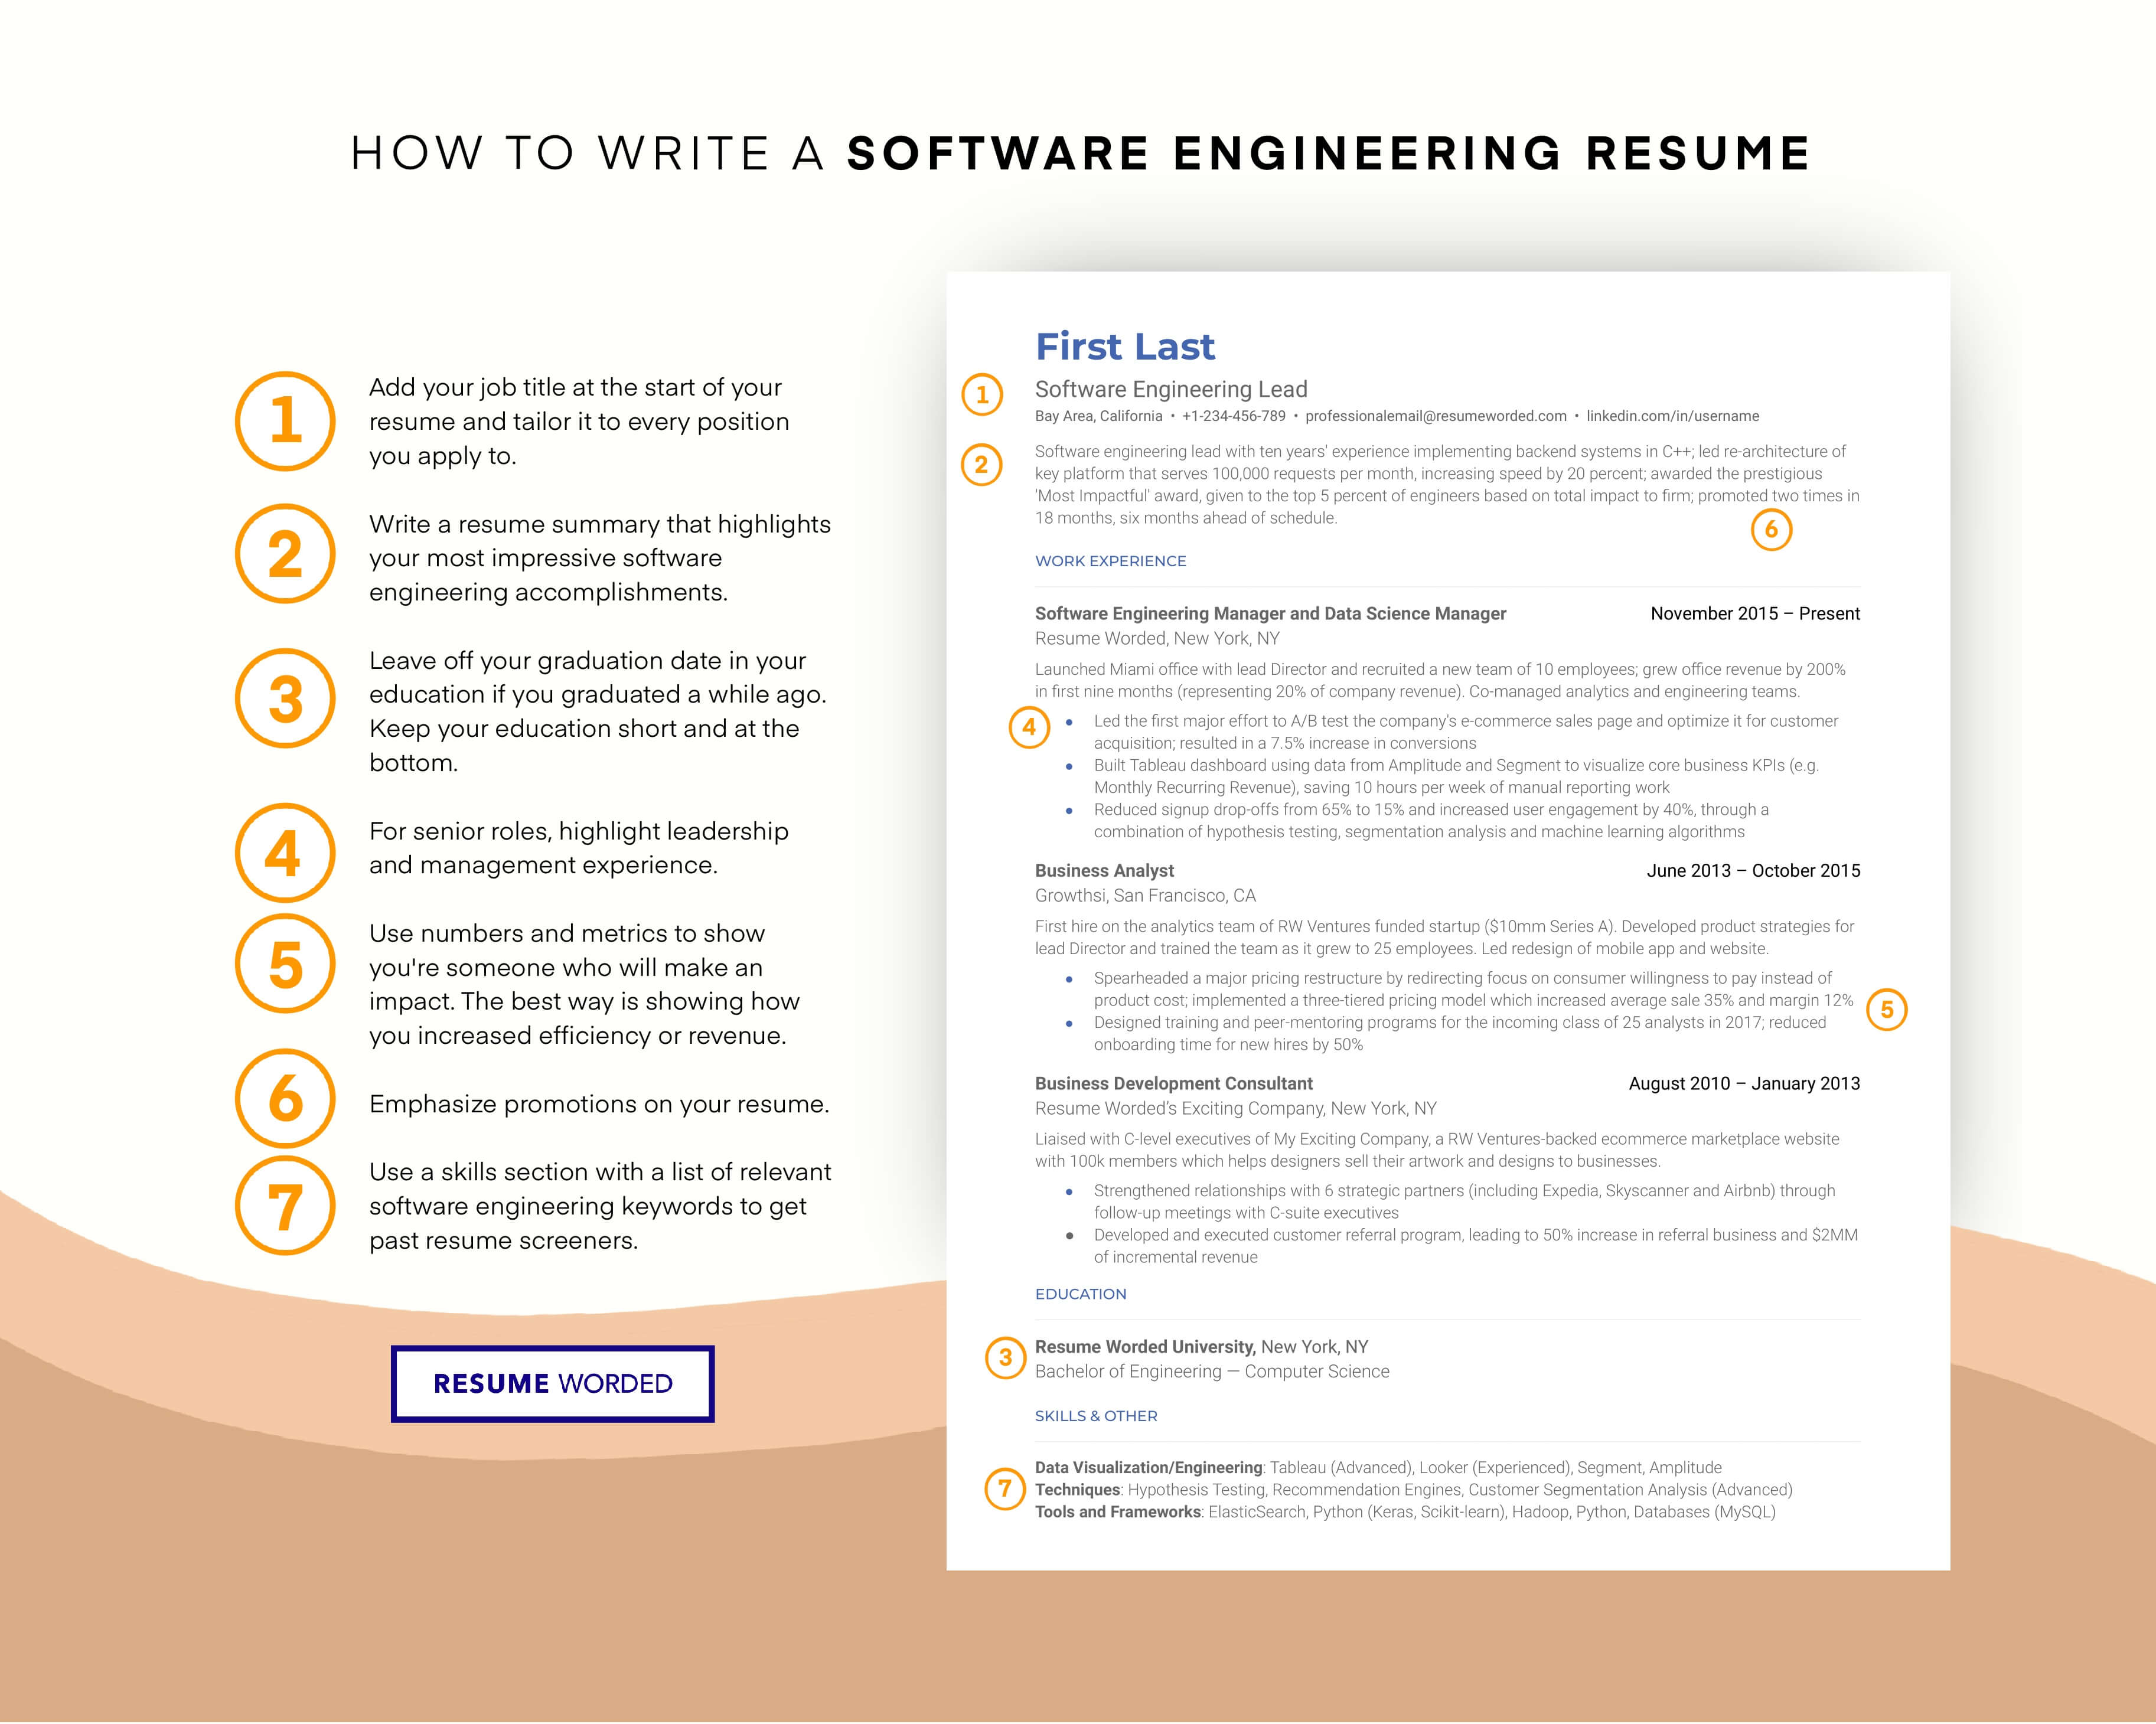 Demonstrate technical programming skills through projects. - Application Support Engineer Resume